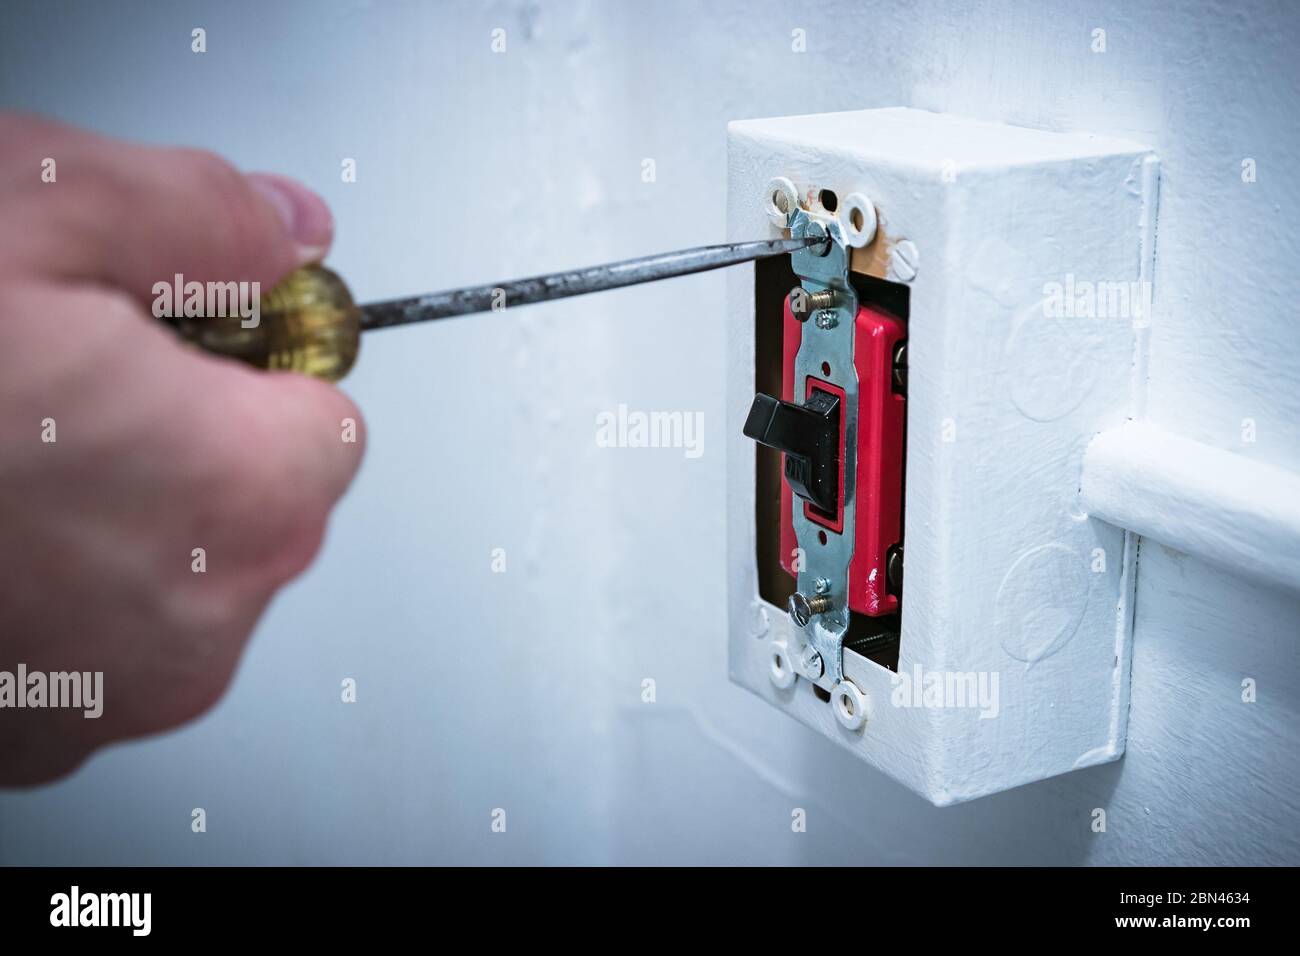 Man's hand using screwdriver to replace/repair 20 amp lightswitch on wall. Stock Photo